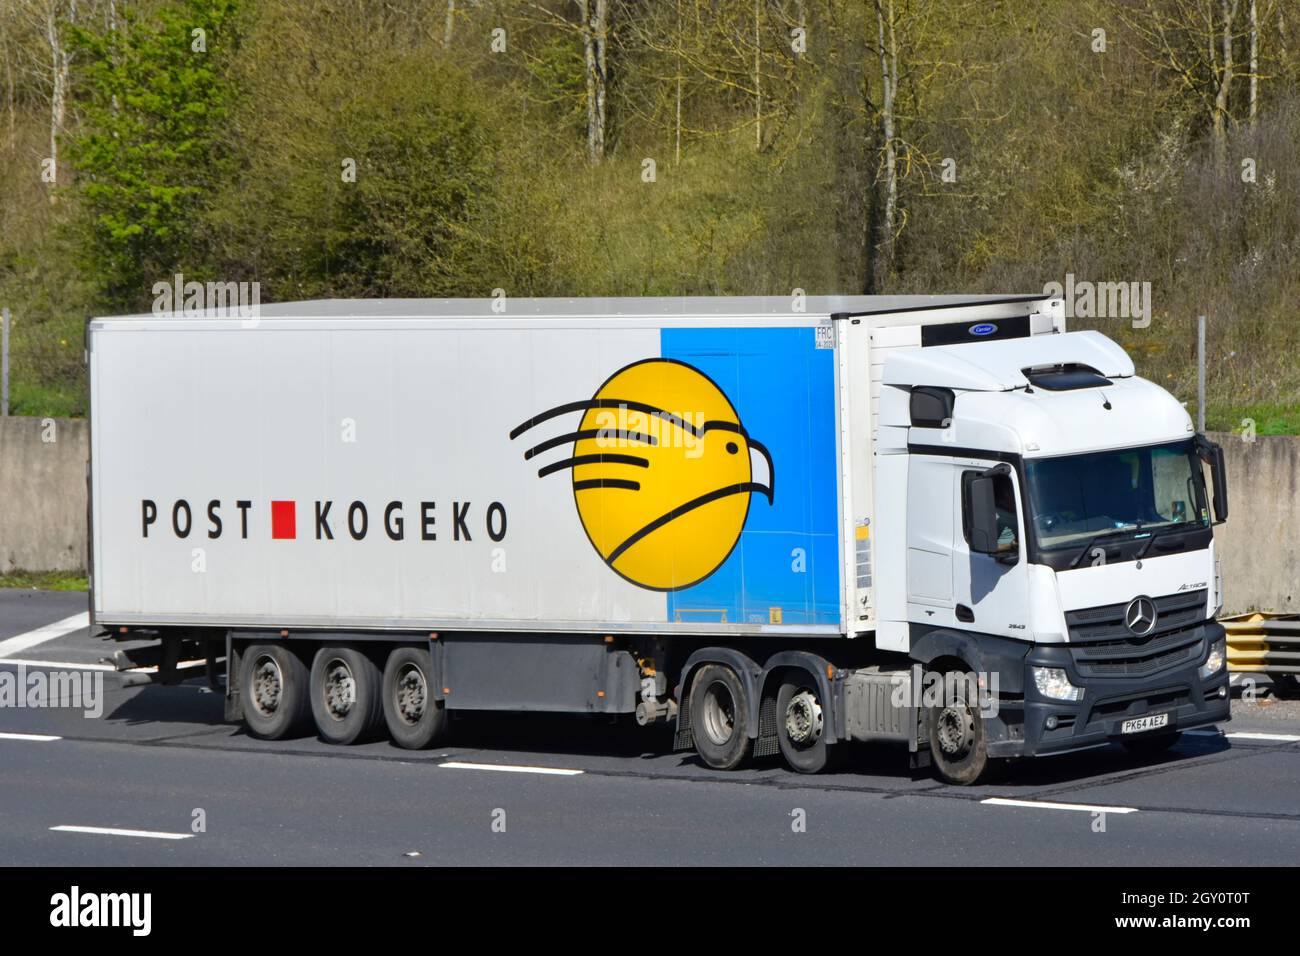 Side & front view white Mercedes HGV lorry truck & Post Kogeko logo on supply chain trailer for food products in Benelux & UK driving English motorway Stock Photo